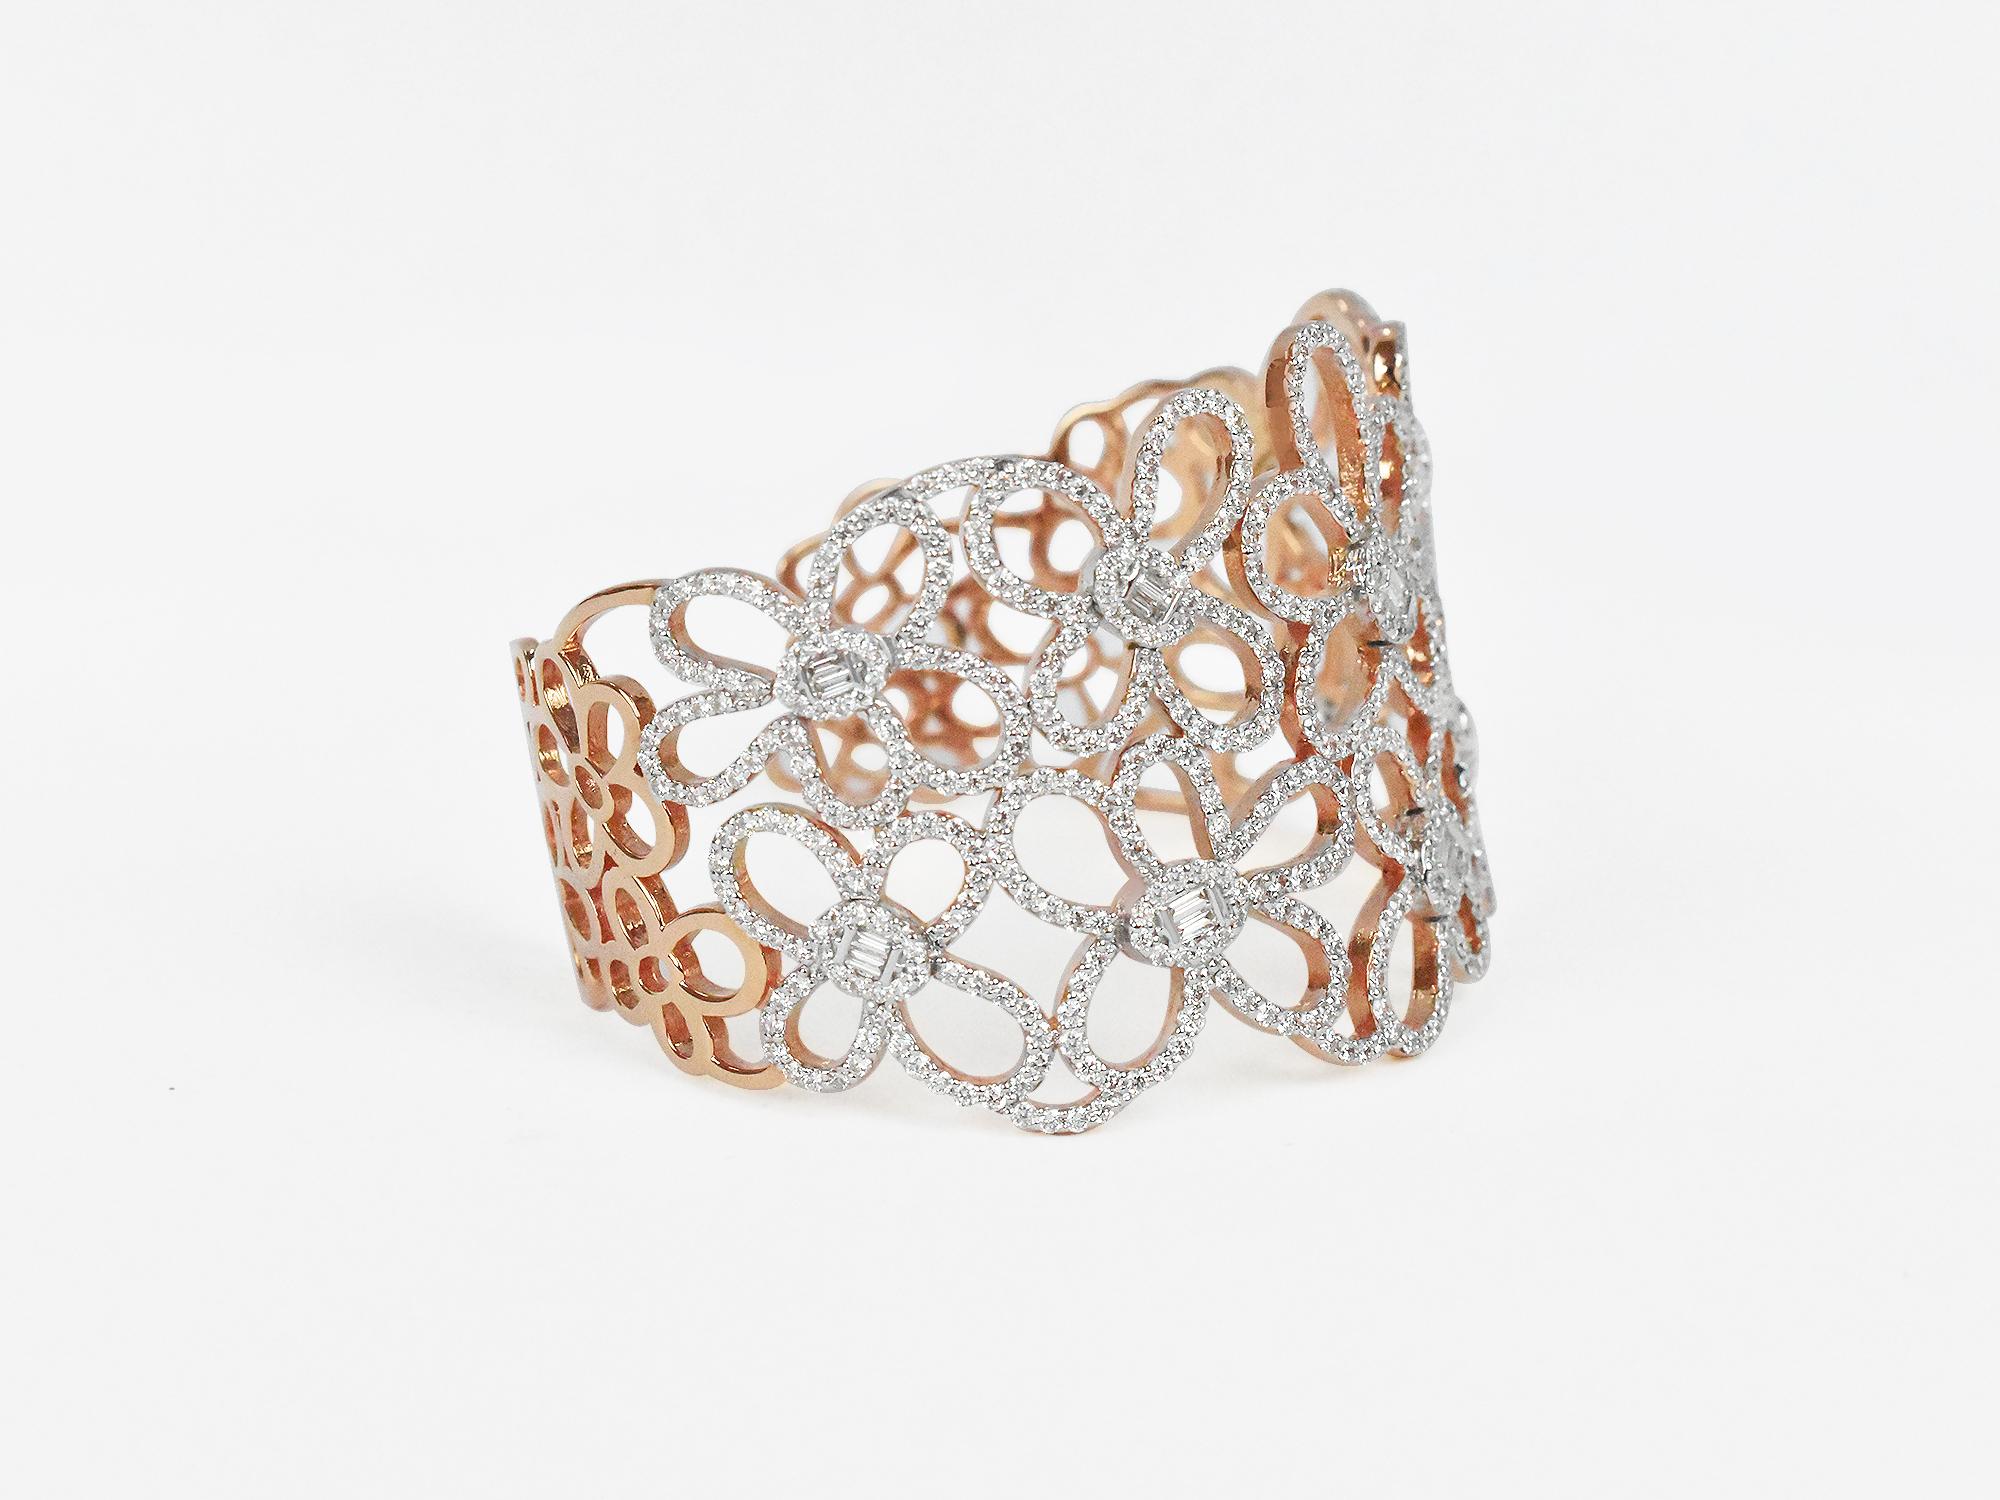 18Karat Gold Rose Gold Diamonds Pave Fashion Open Cuff Bangle Bracelet
             This 18K solid Rose Gold is an open cuff bangle. A strong distinctive architectural piece of jewelry for years, decades & generations to wear this piece. Created by